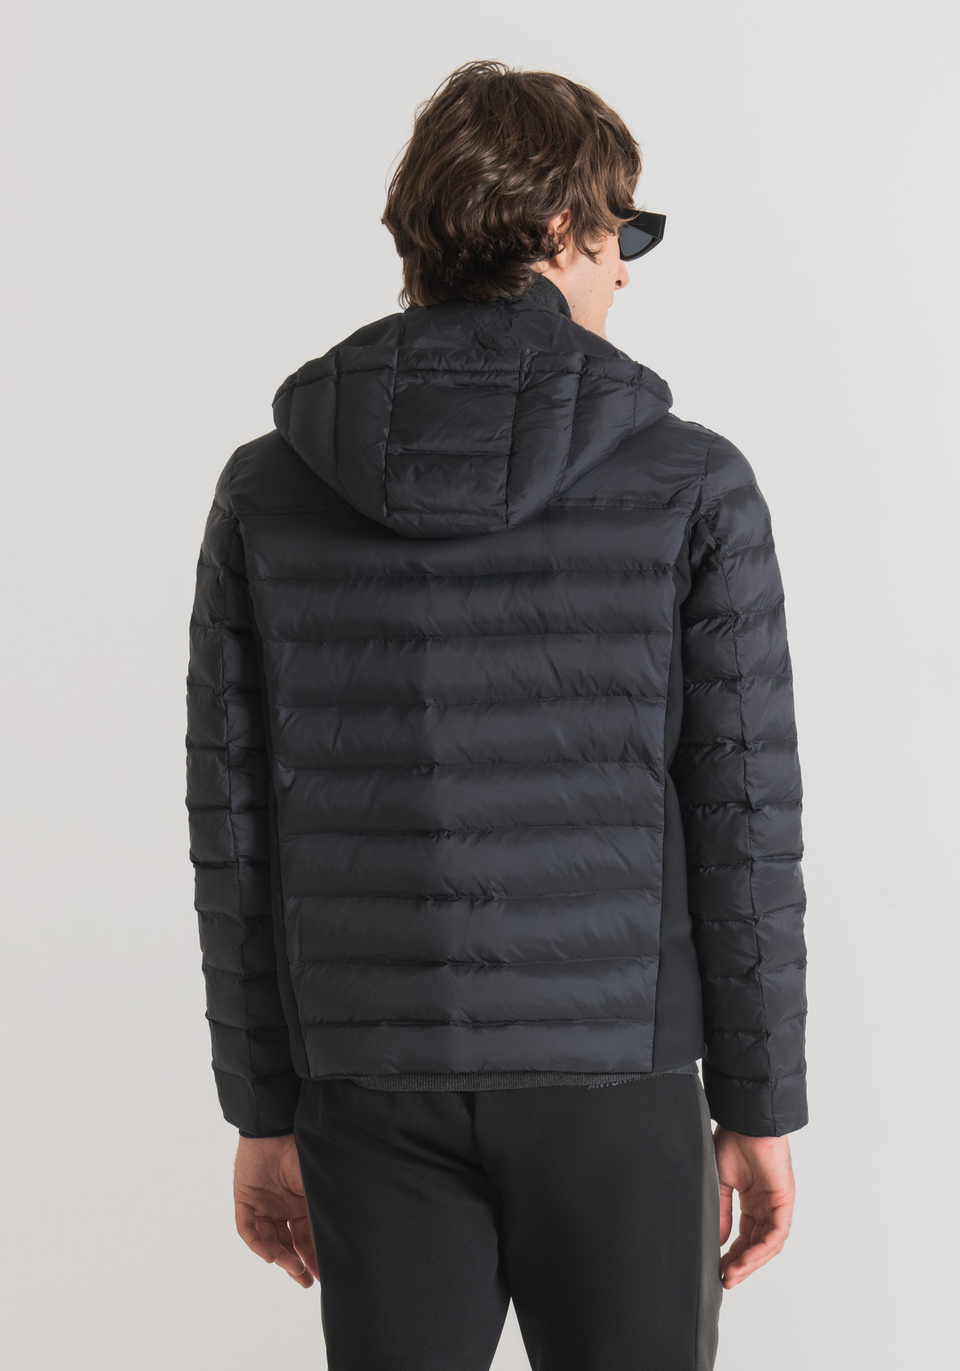 SLIM FIT QUILTED JACKET IN TECHNICAL FABRIC WITH HOOD - Antony Morato Online Shop